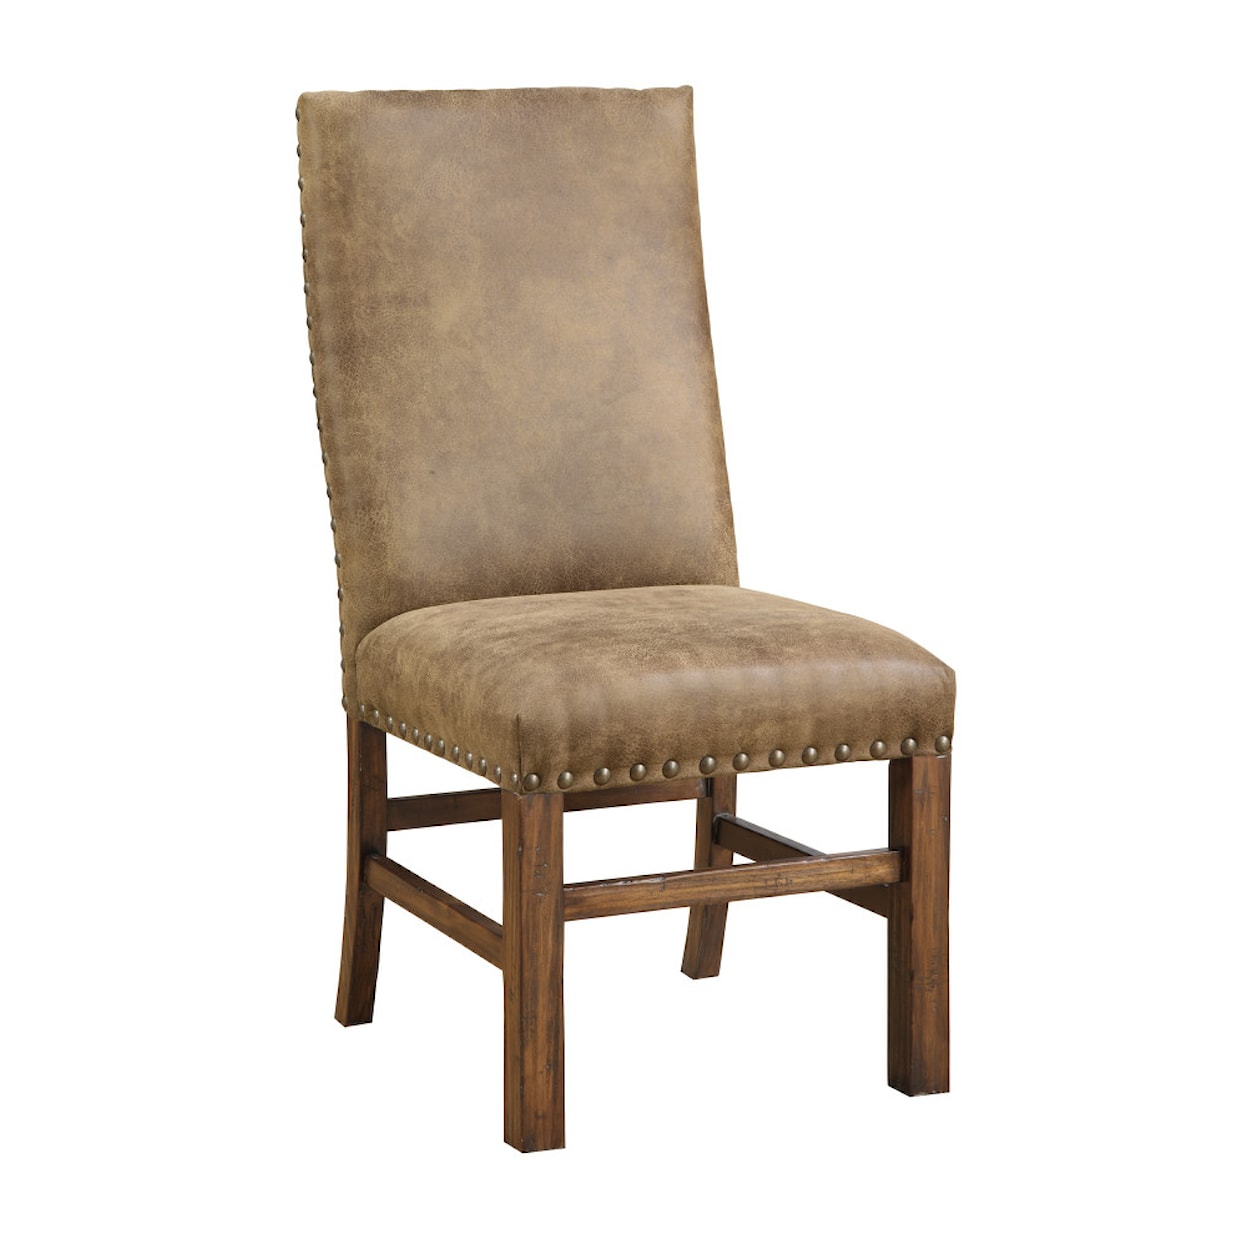 Emerald Chambers Creek Upholstered Dining Chair